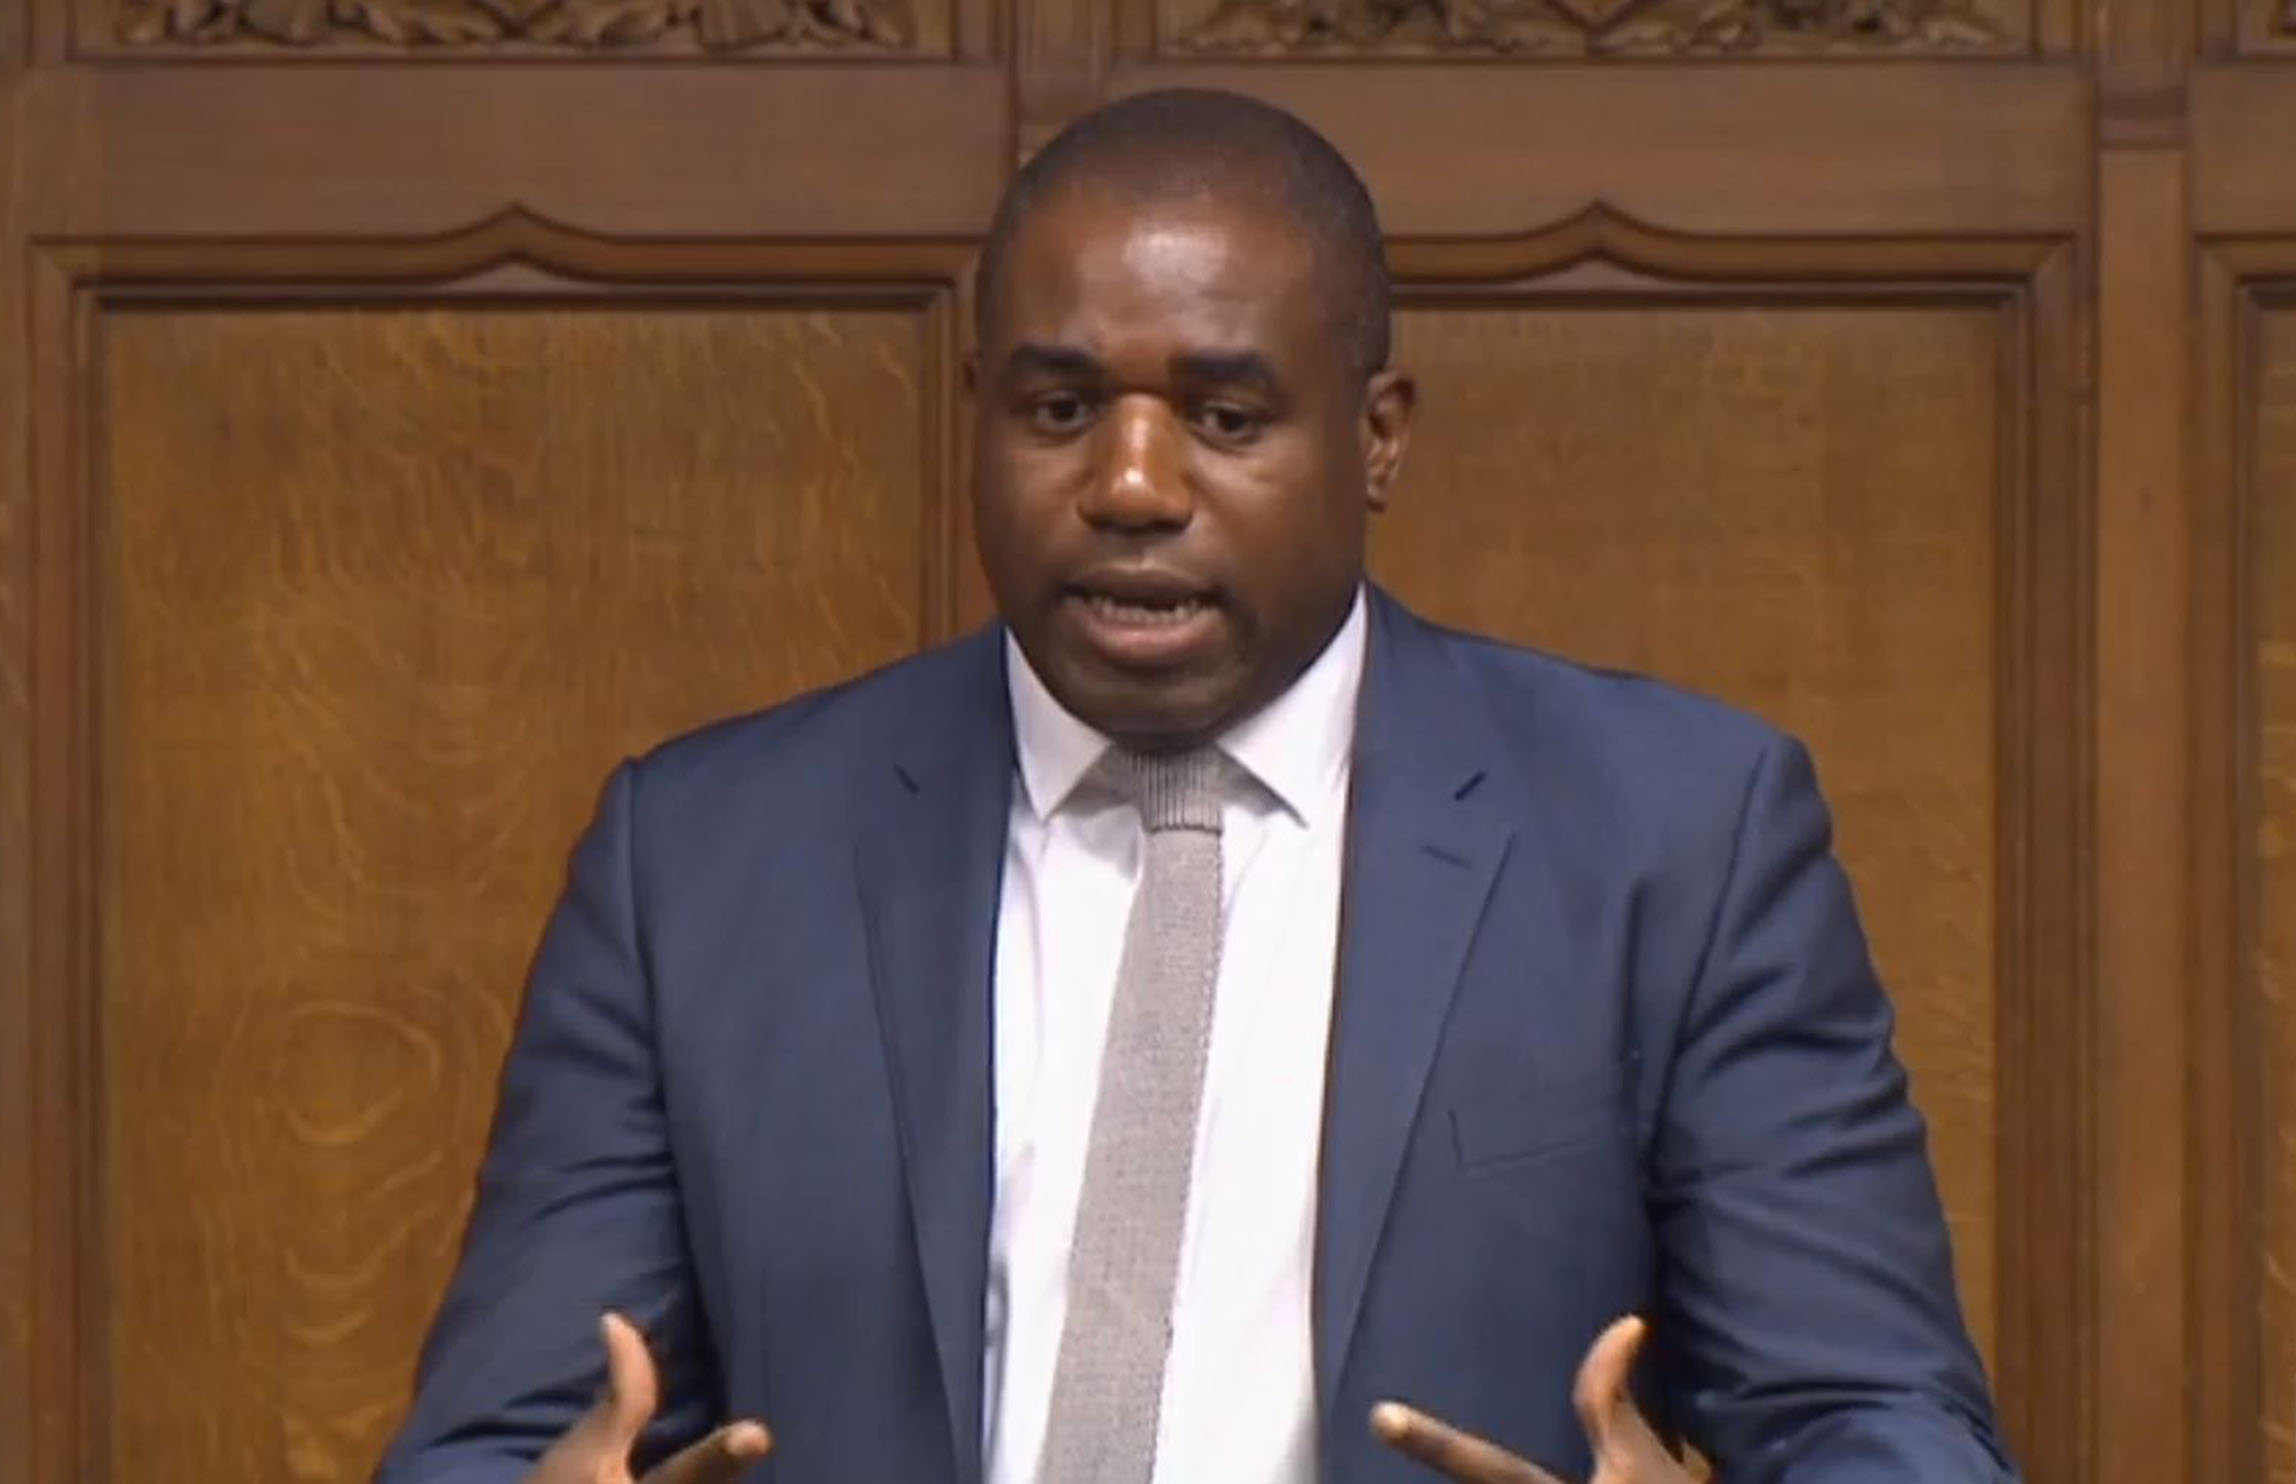 David Lammy said the inquiry&nbsp;seemed&nbsp;'distant and unresponsive' to&nbsp;survivors and the bereaved